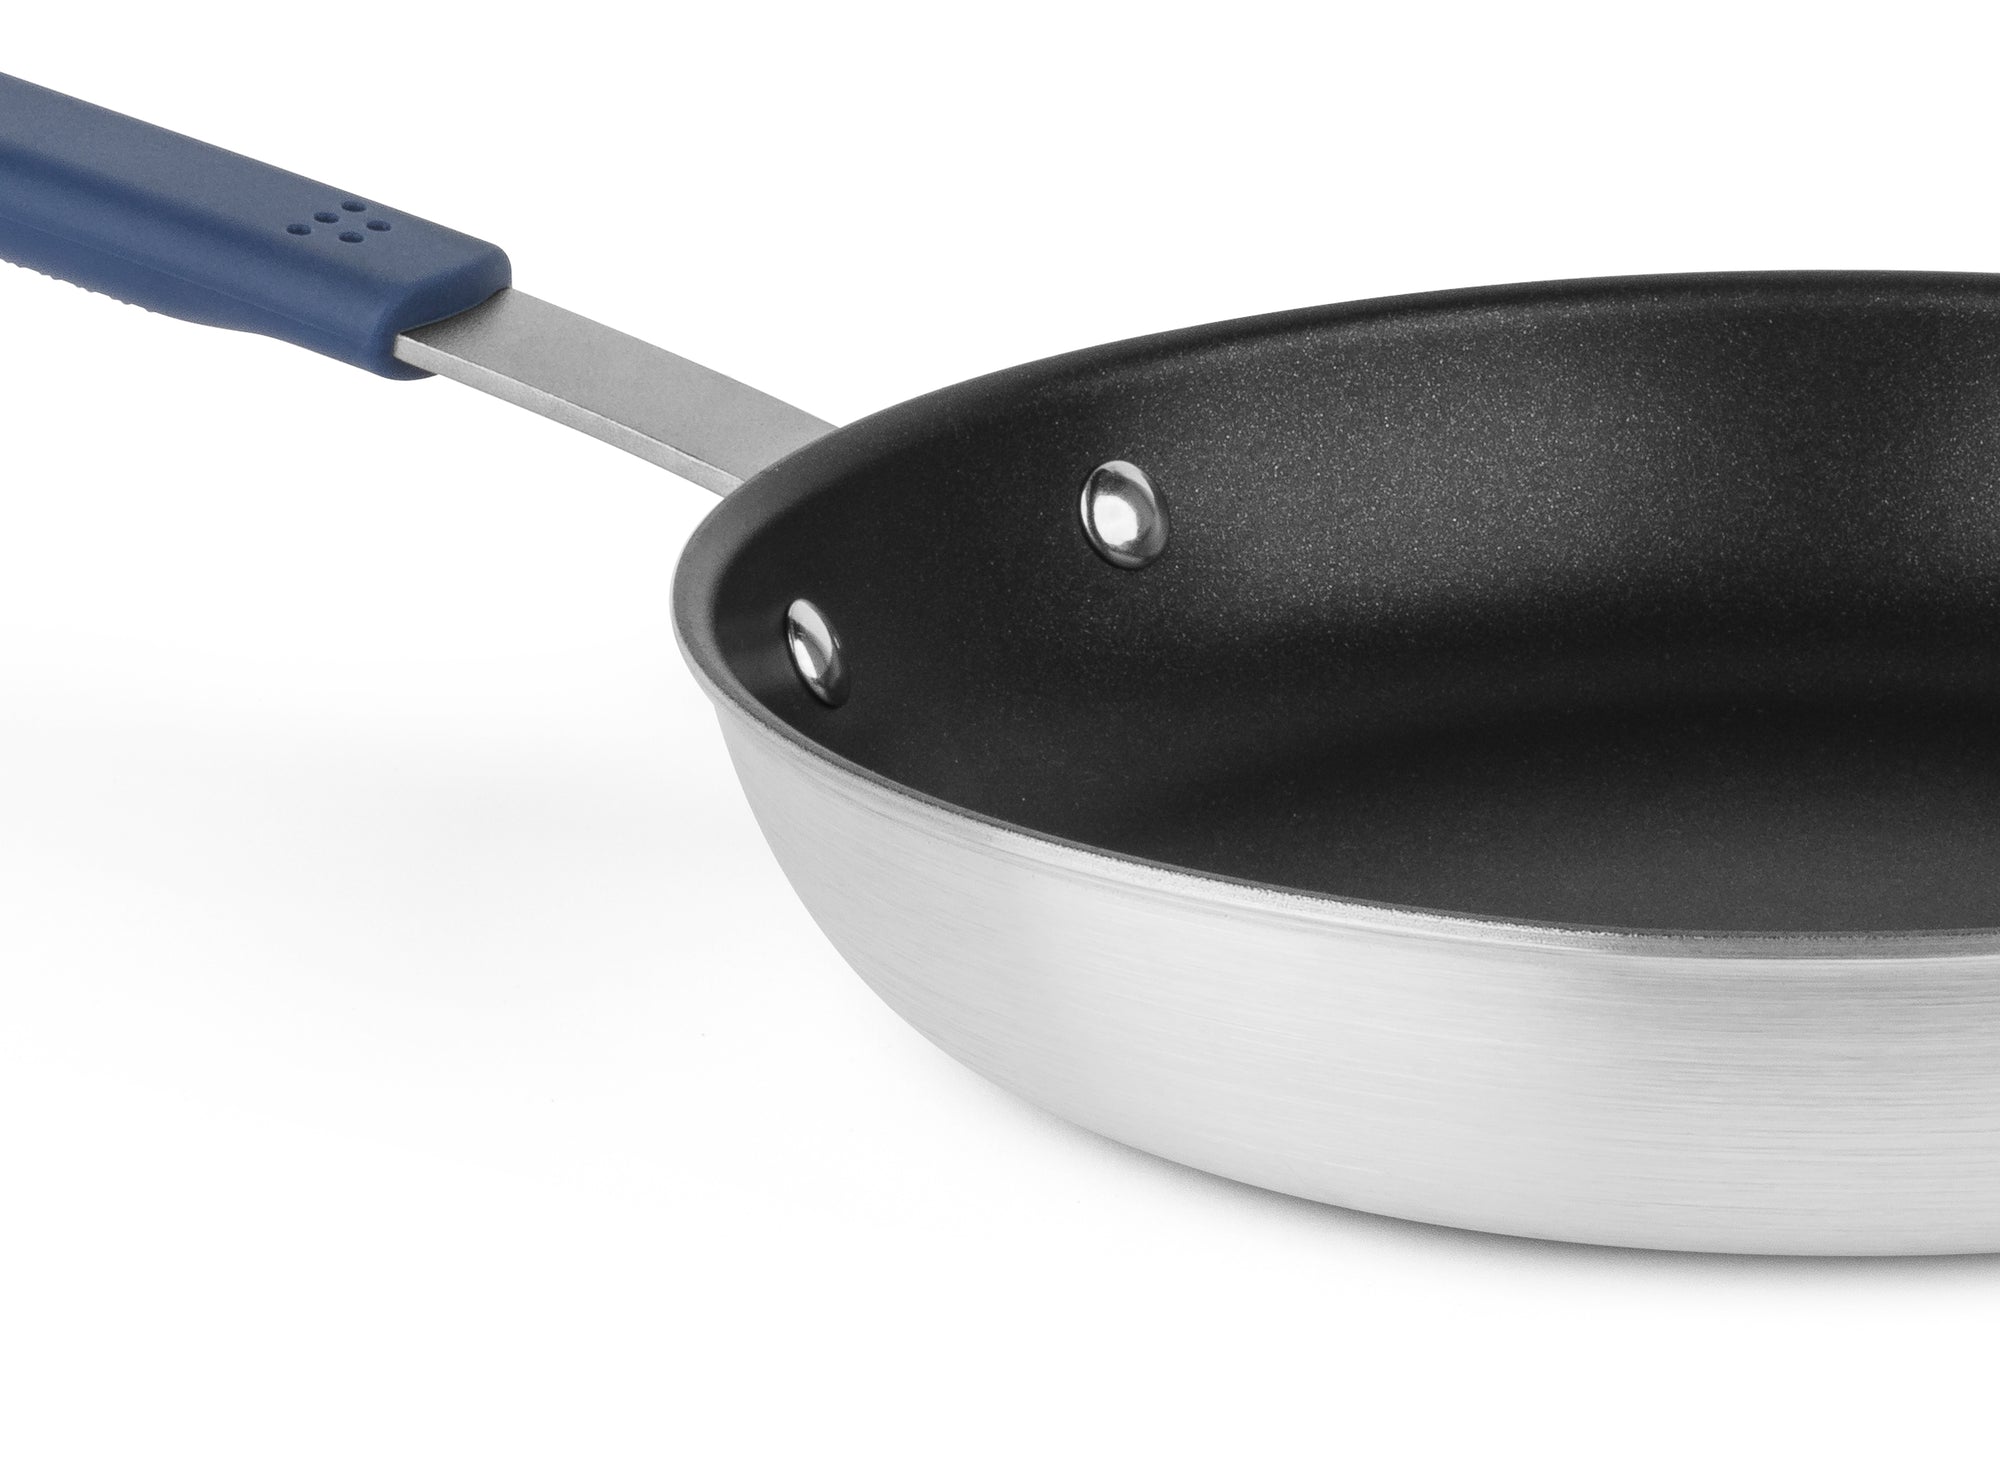 Misen Pan Review: Testing Misen's Nonstick and Carbon Steel Pans